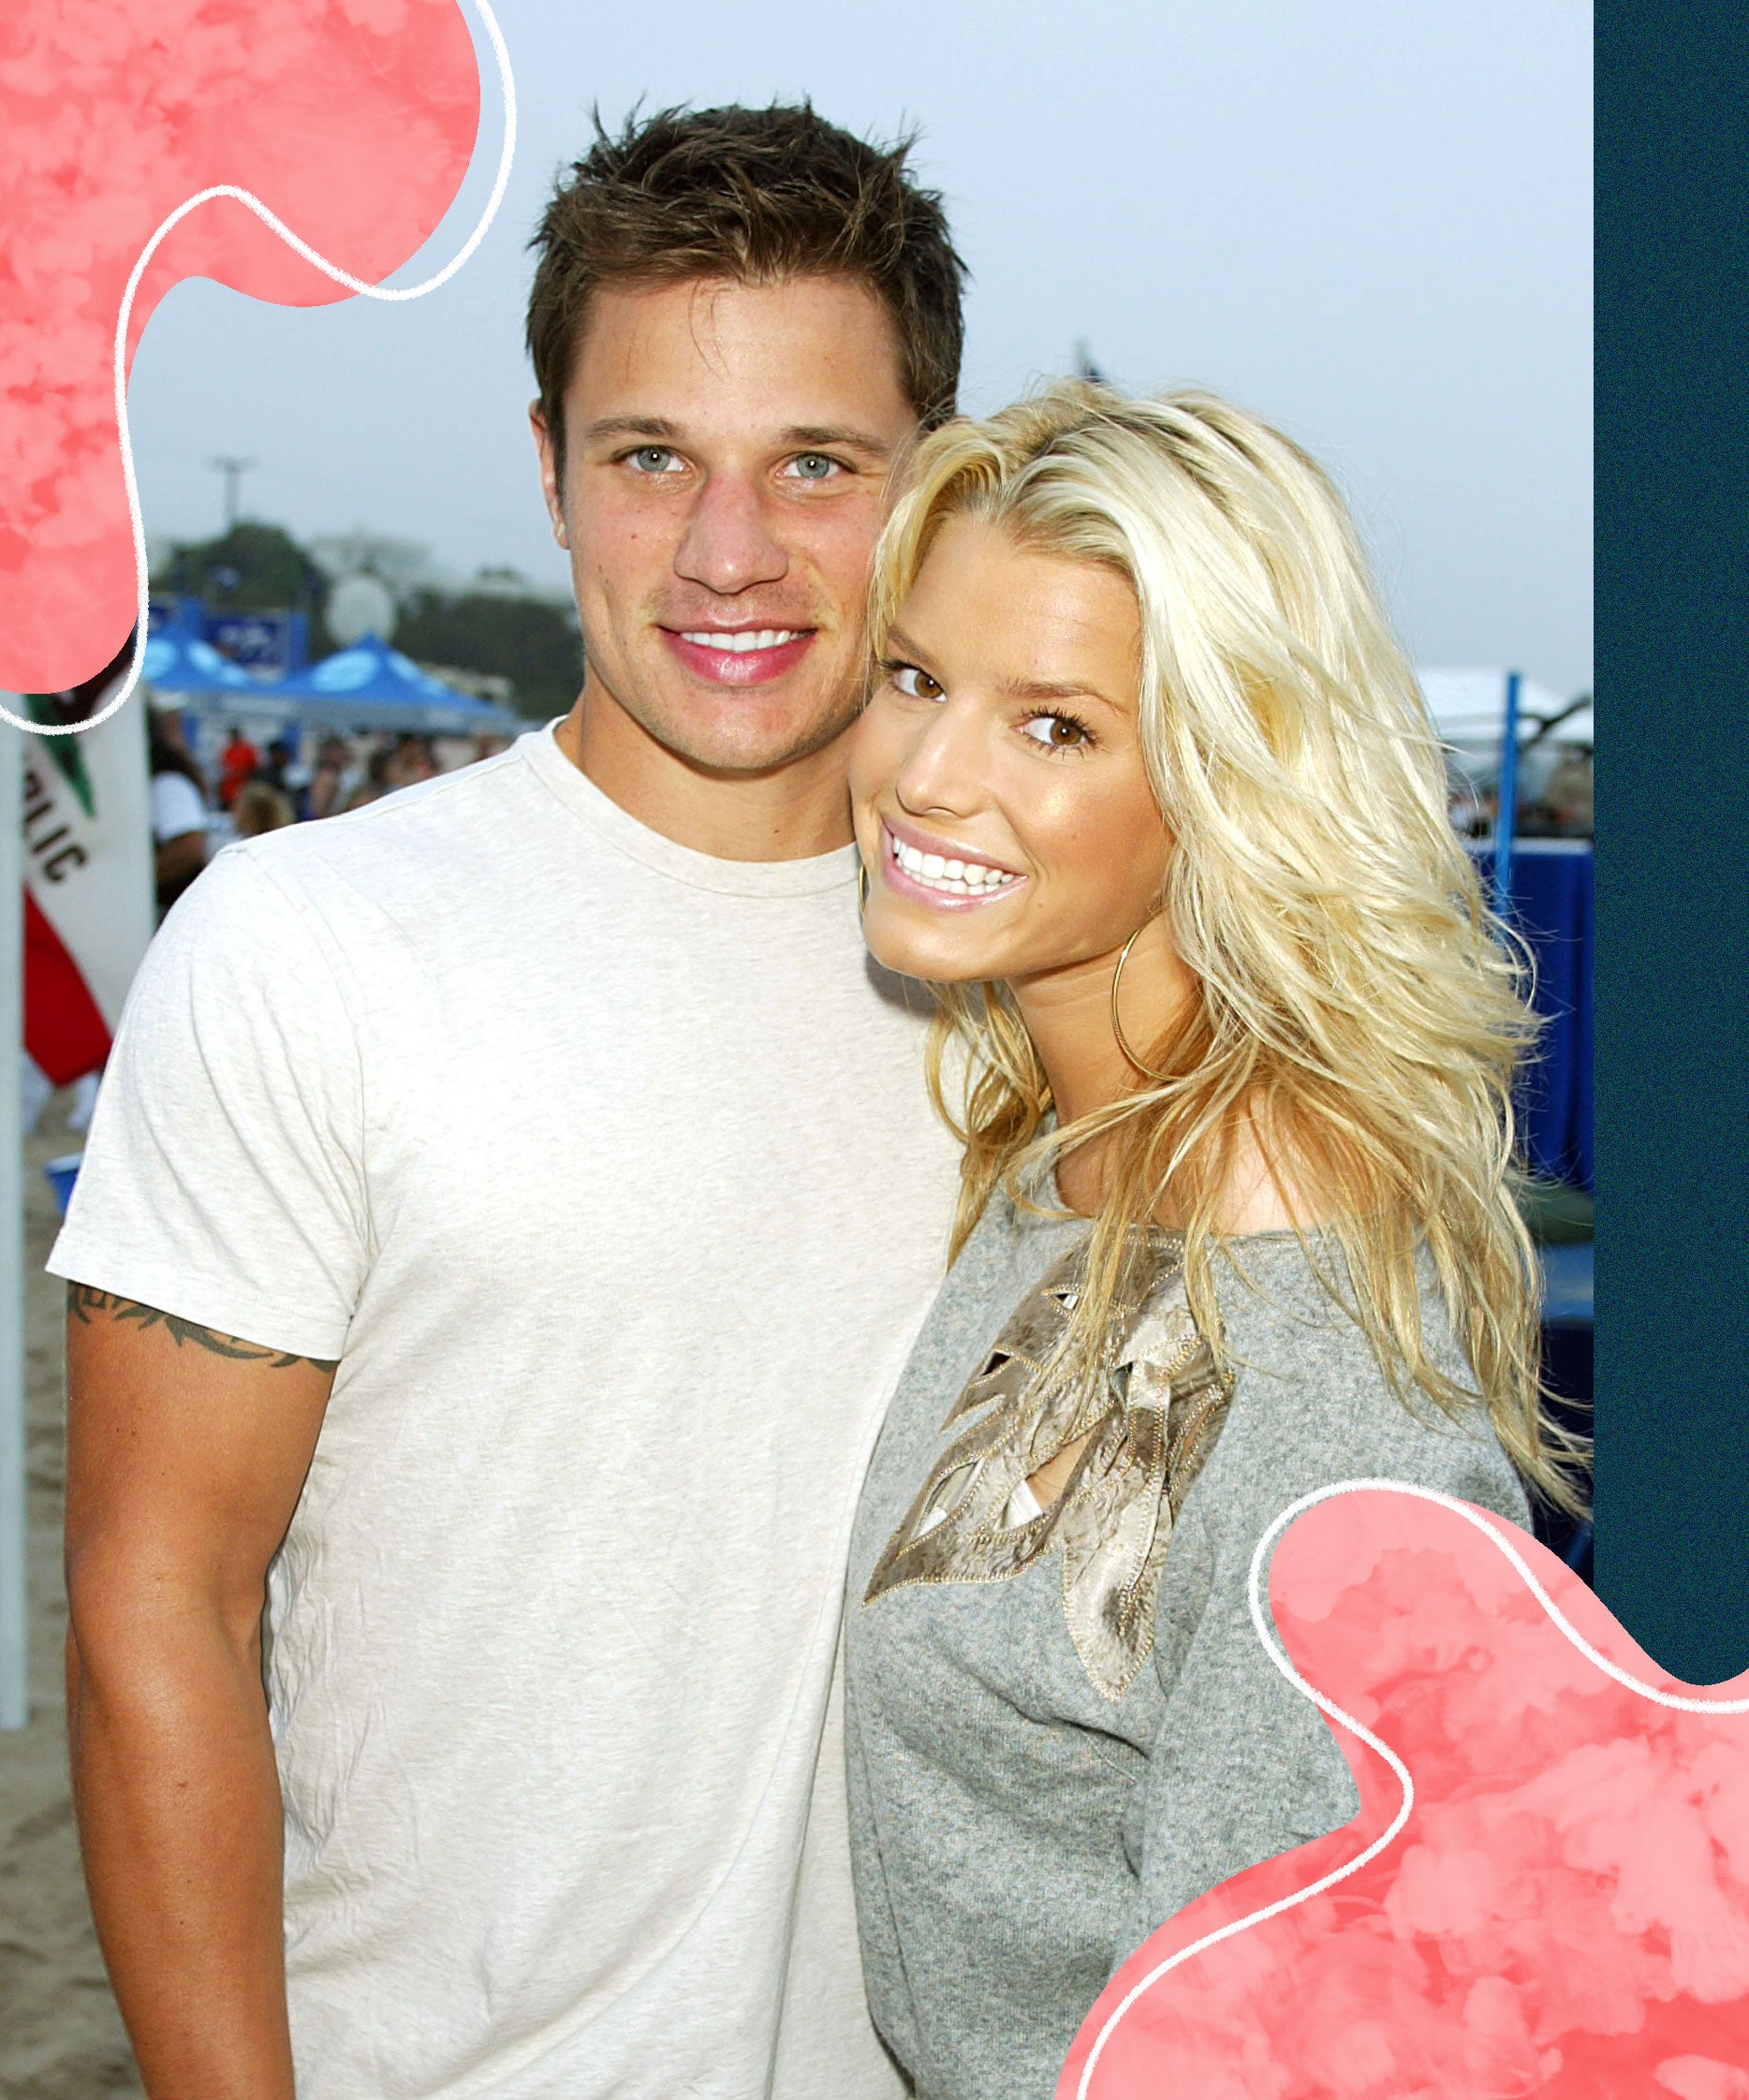 Nick Lachey Makes Apparent Dig At Jessica Simpson Marriage During